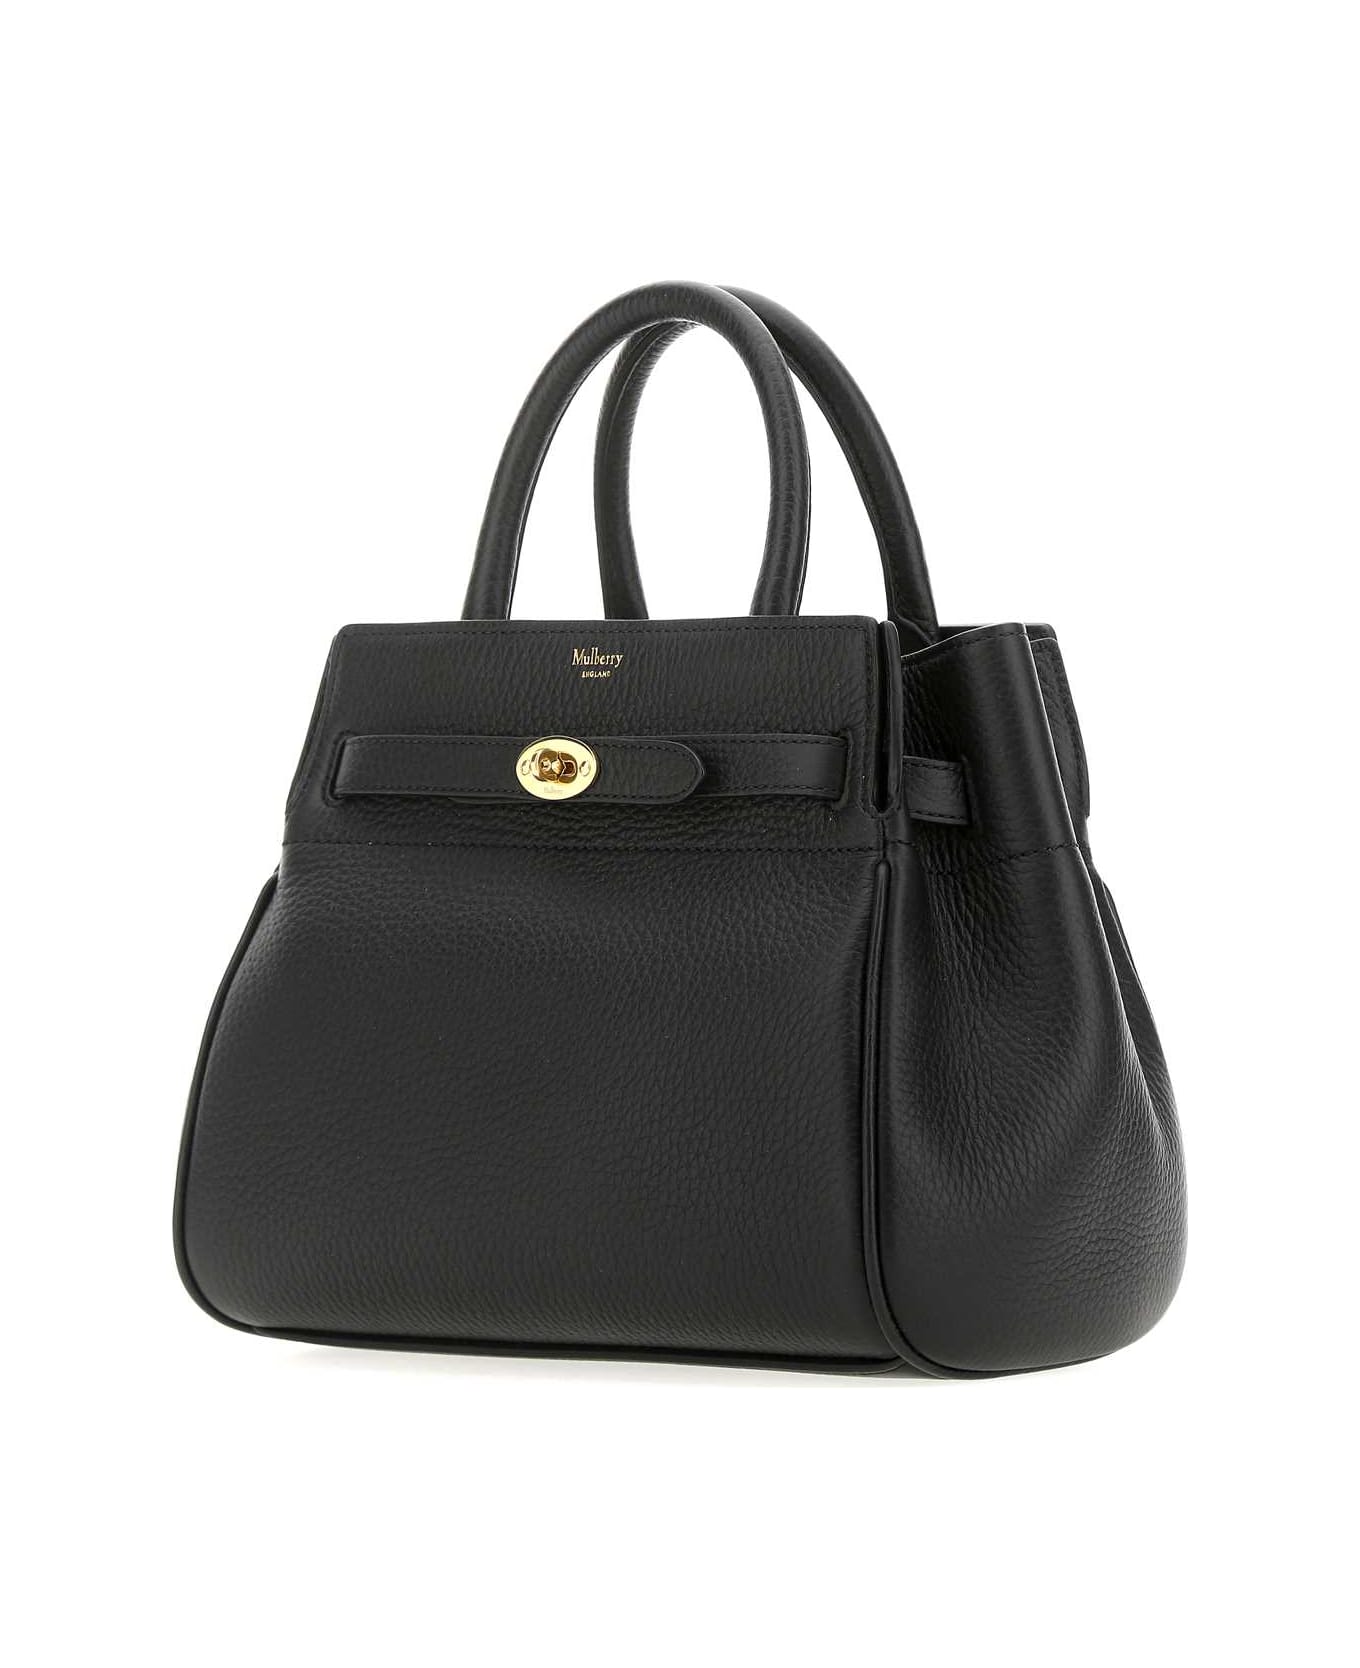 Mulberry Black Leather Small Bayswater Handbag - A100